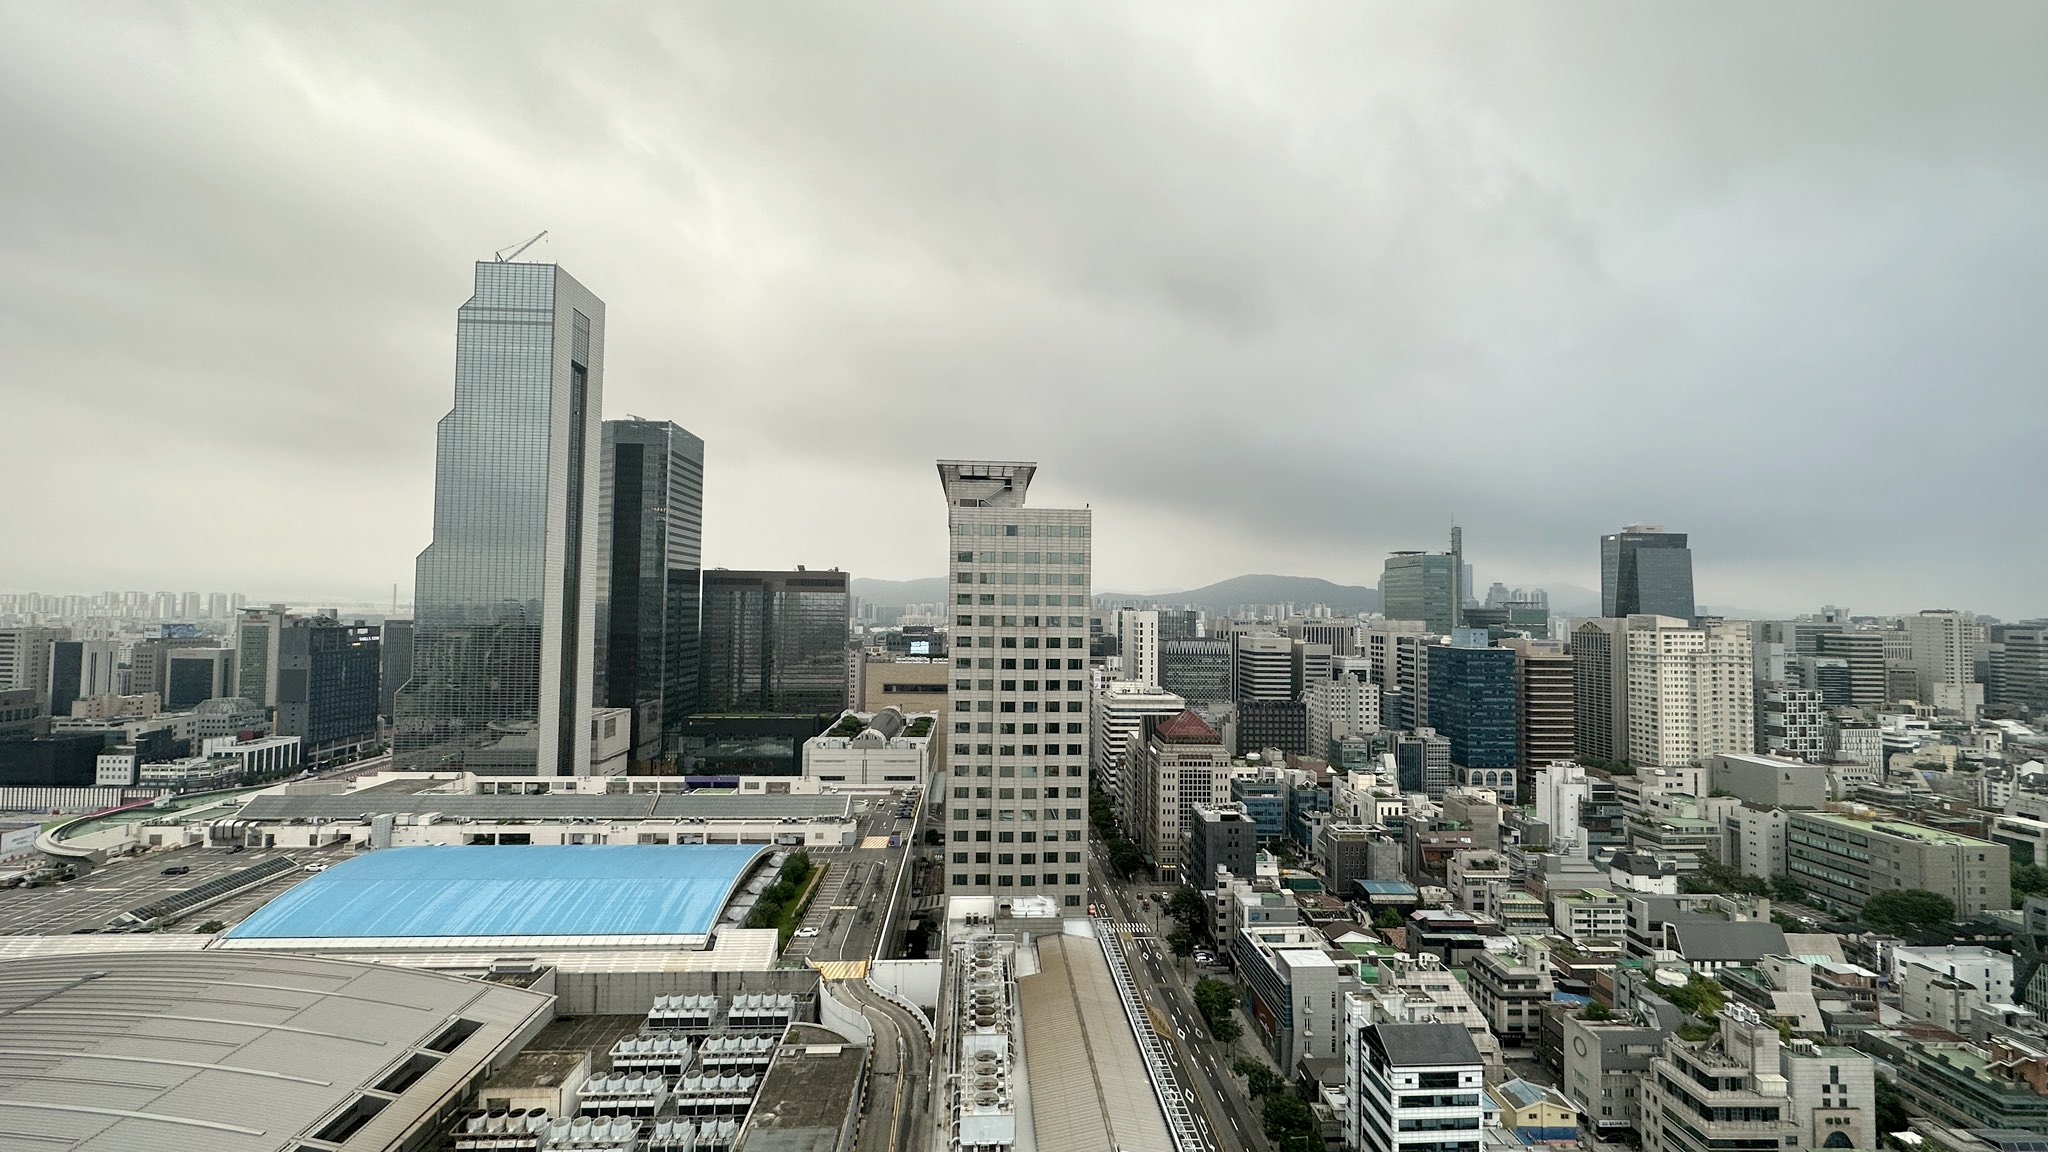 View of cloudy Seoul skyscape with mountain in distance